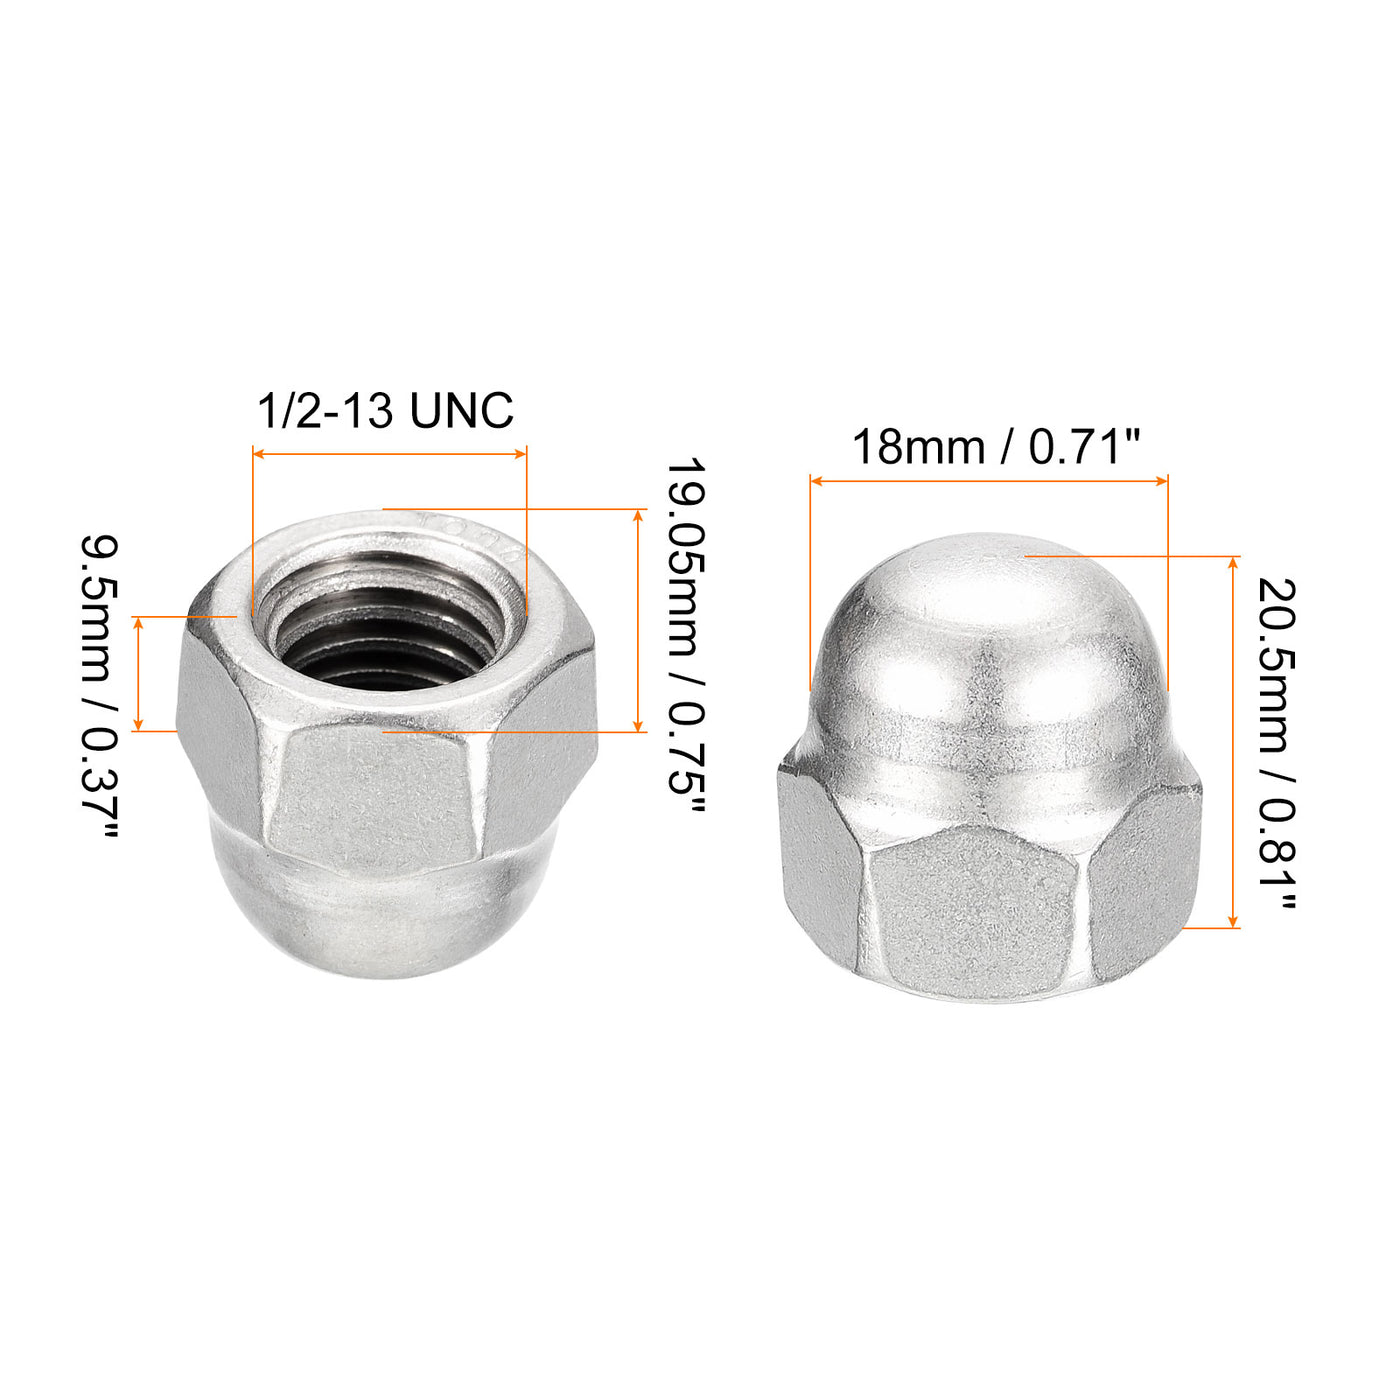 uxcell Uxcell 1/2-13 Acorn Cap Nuts,5pcs - 304 Stainless Steel Hardware Nuts, Acorn Hex Cap Dome Head Nuts for Fasteners (Silver)